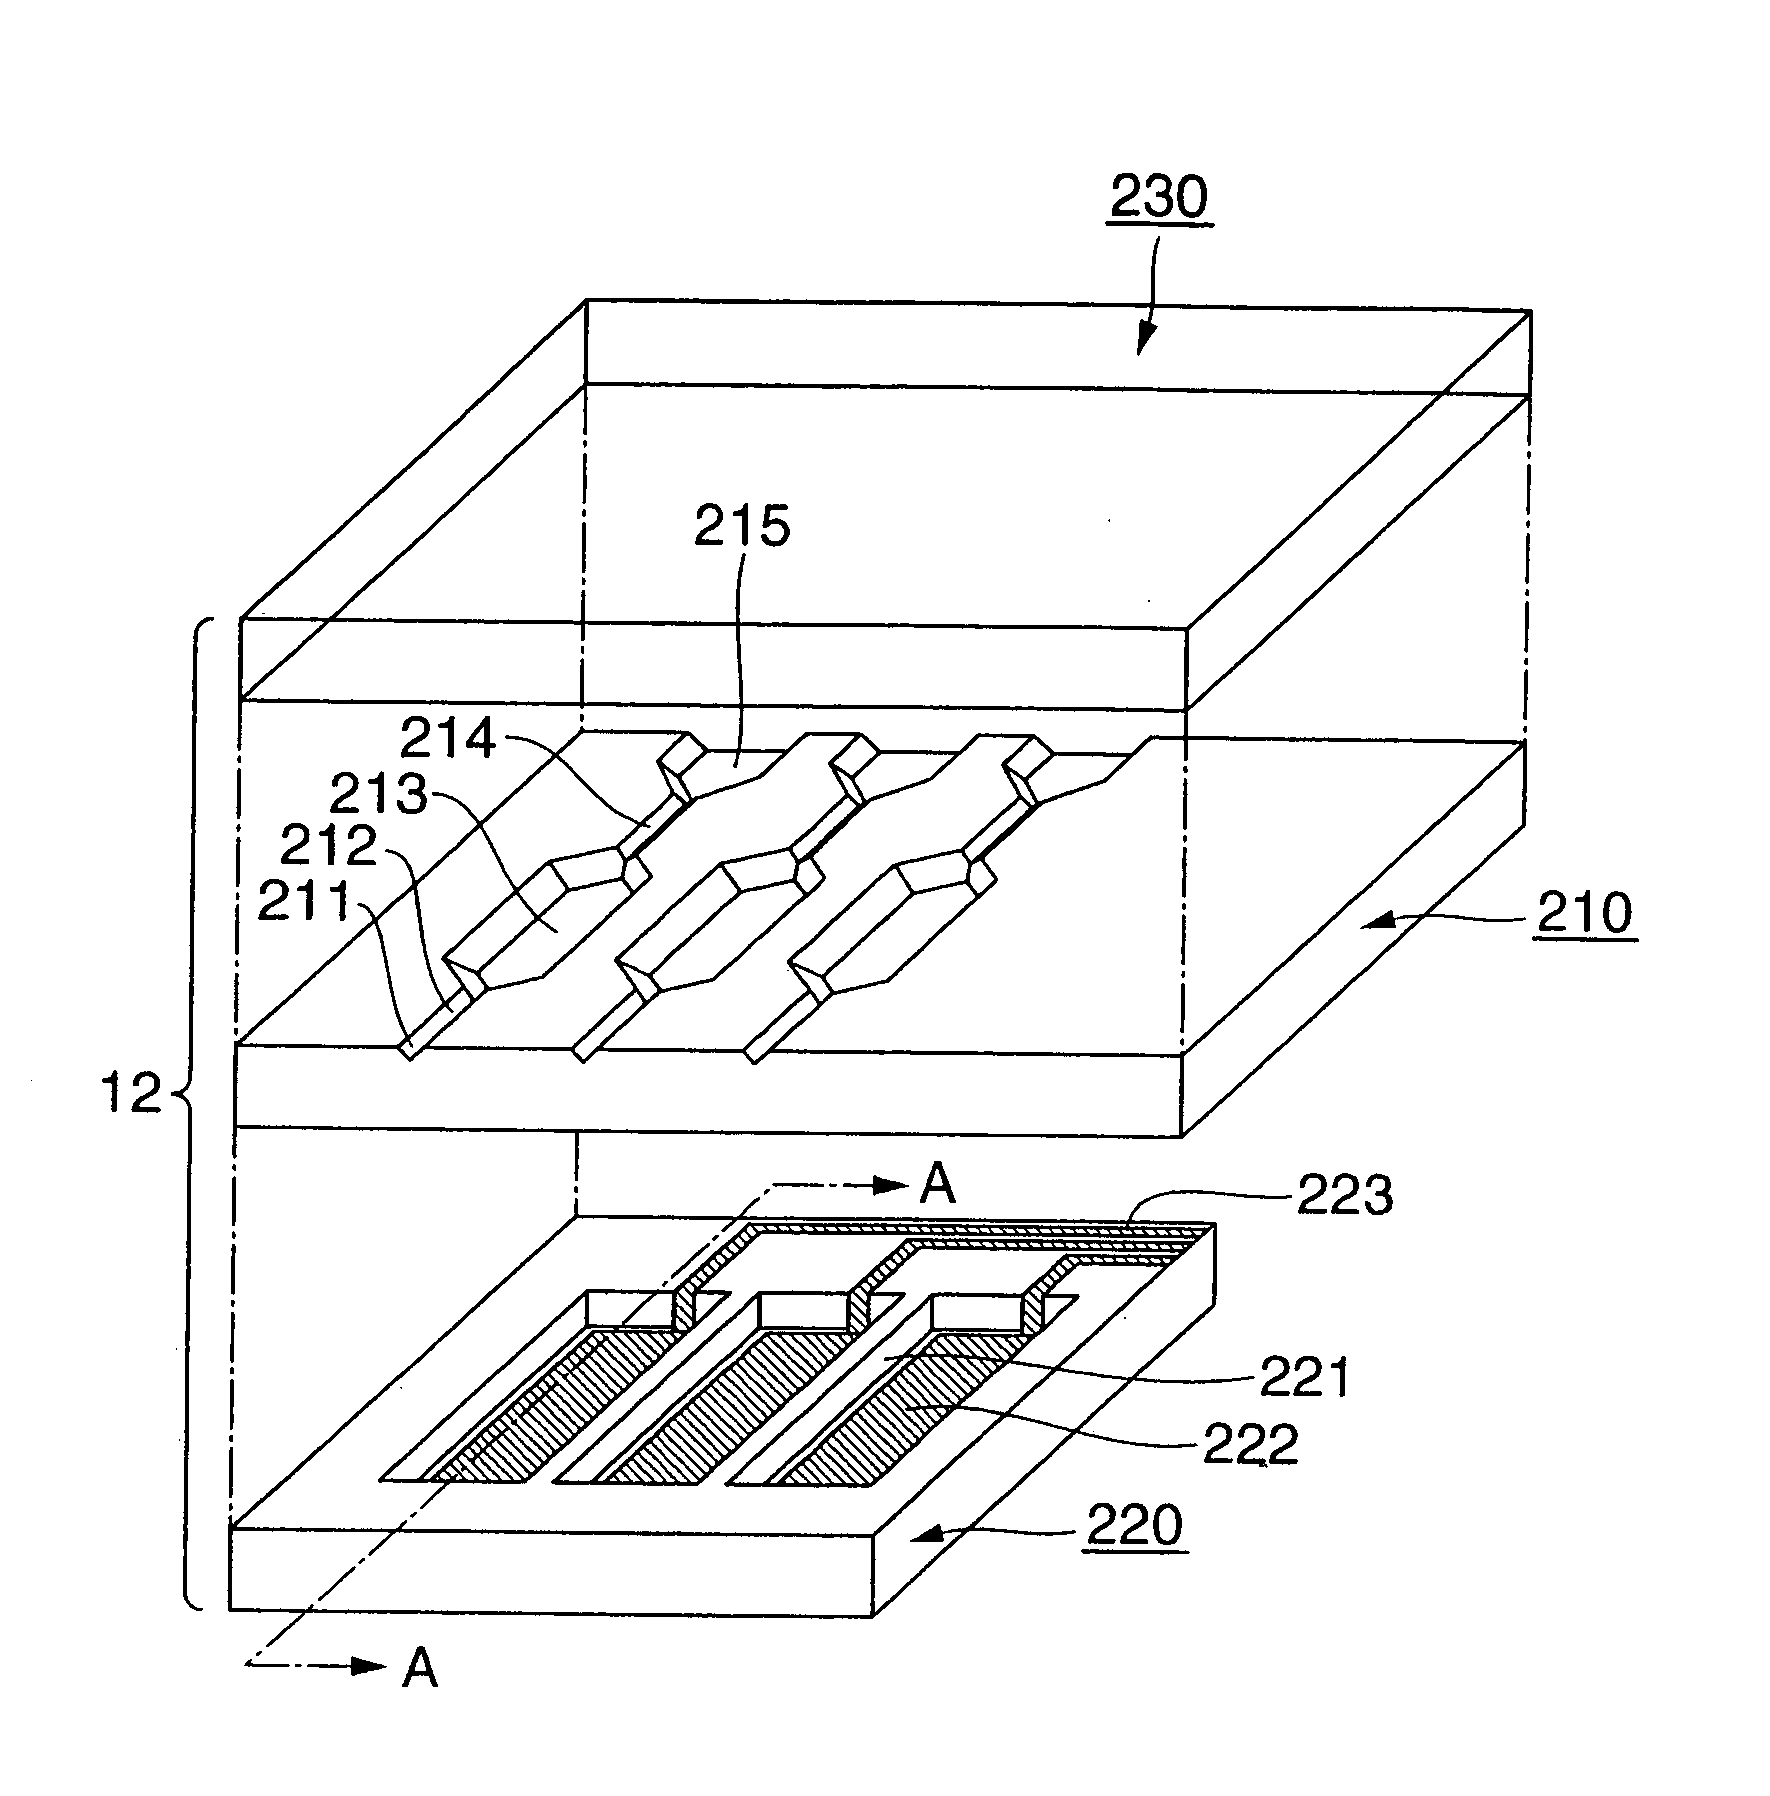 Dispensing device, dispensing method and method of detecting defective discharge of solution containing biological sample